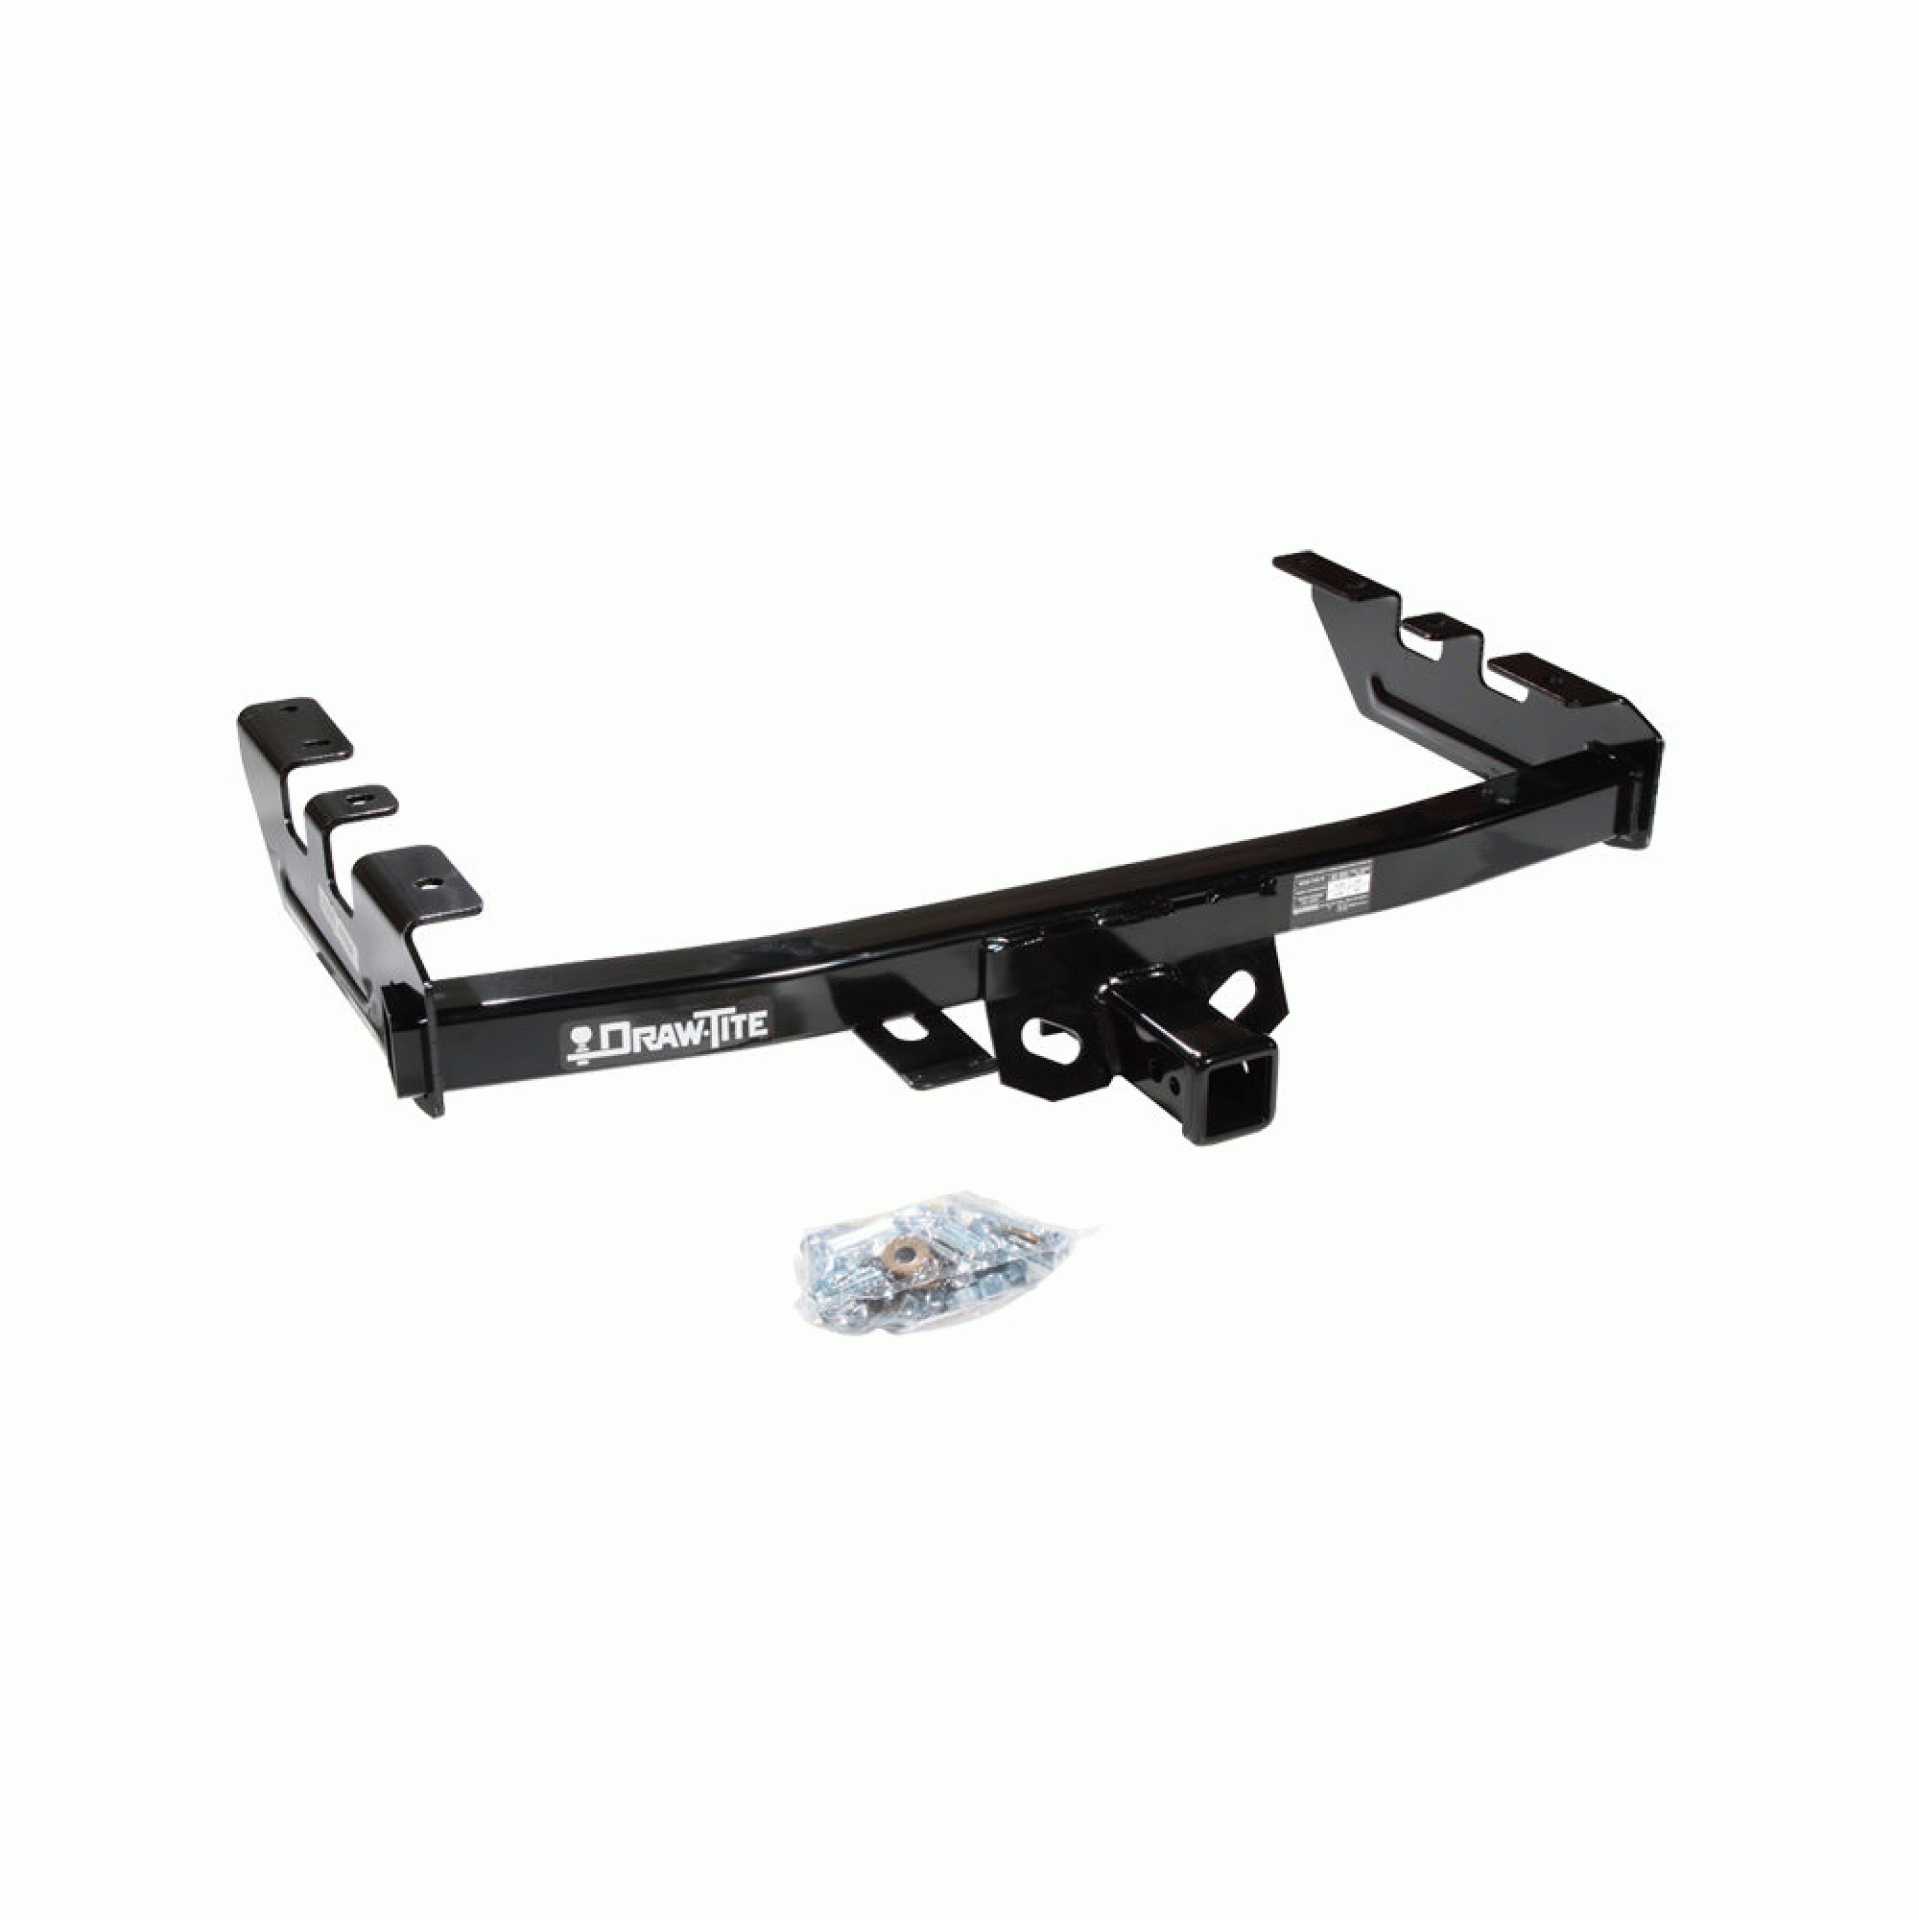 DRAW-TITE | 41534 | HITCH CLASS III REQUIRES 2 INCH REMOVABLE DRAWBAR